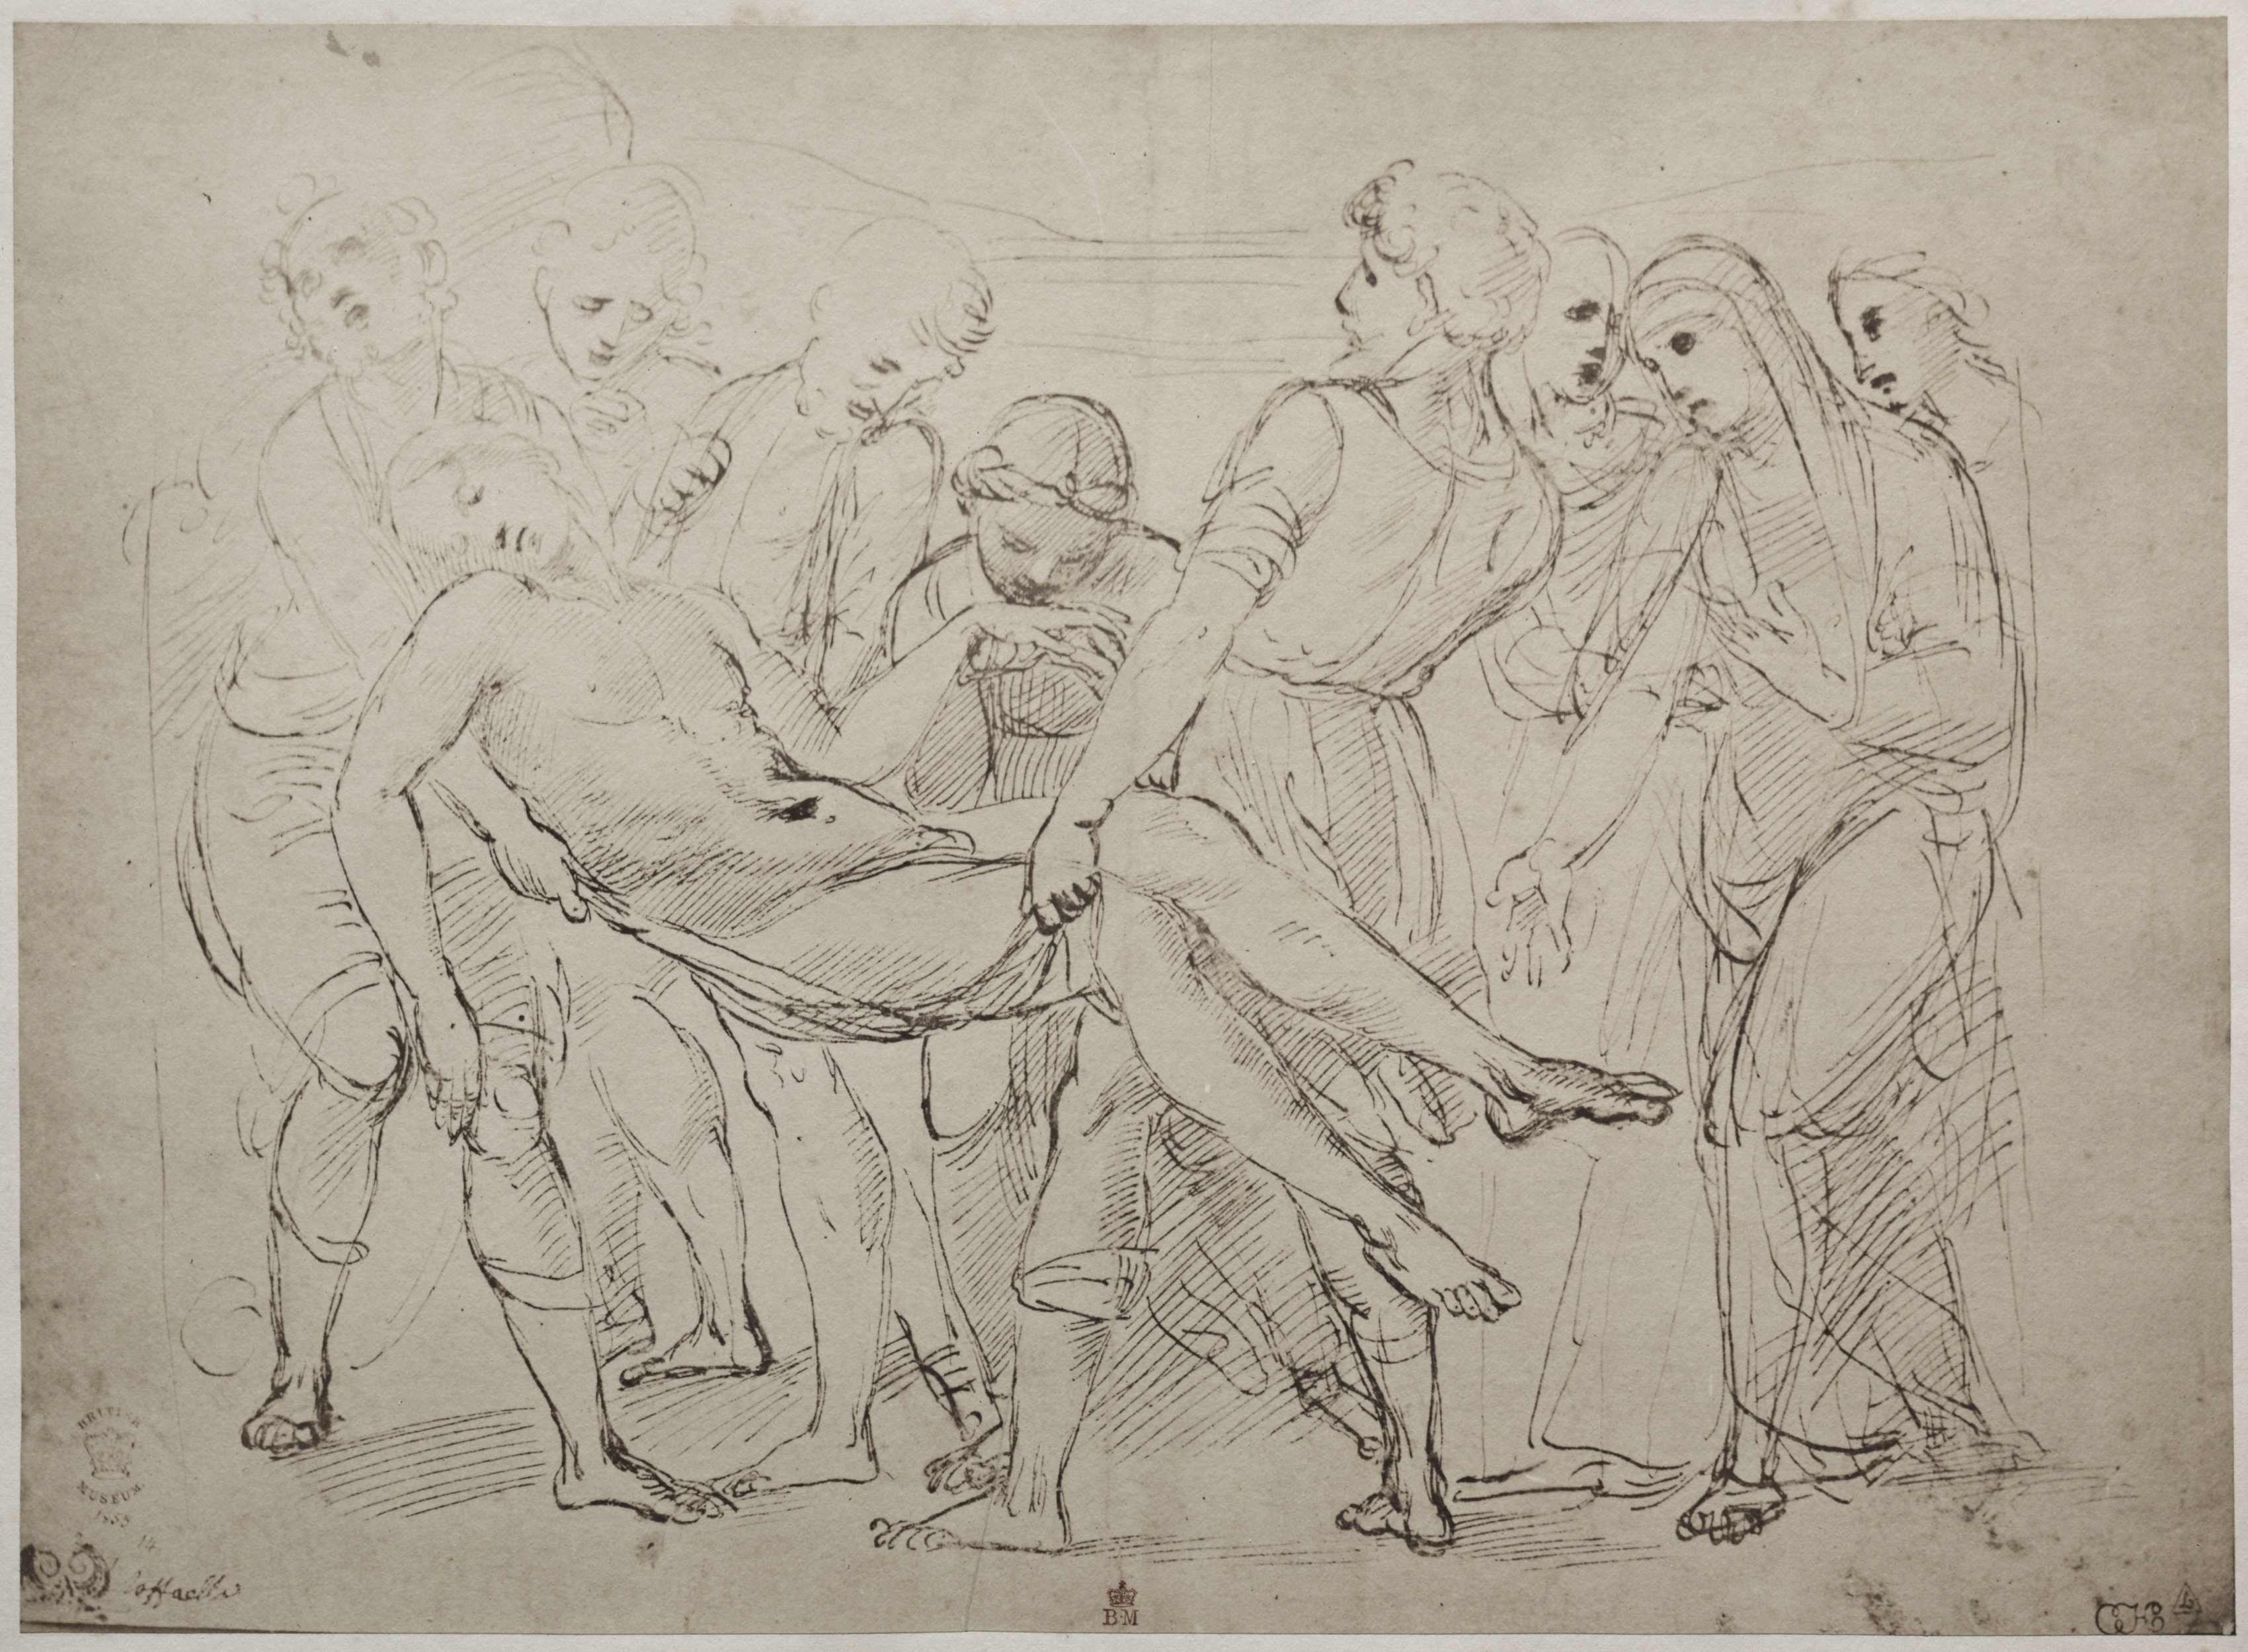 Drawing by Raphael Sanzio in the British Museum